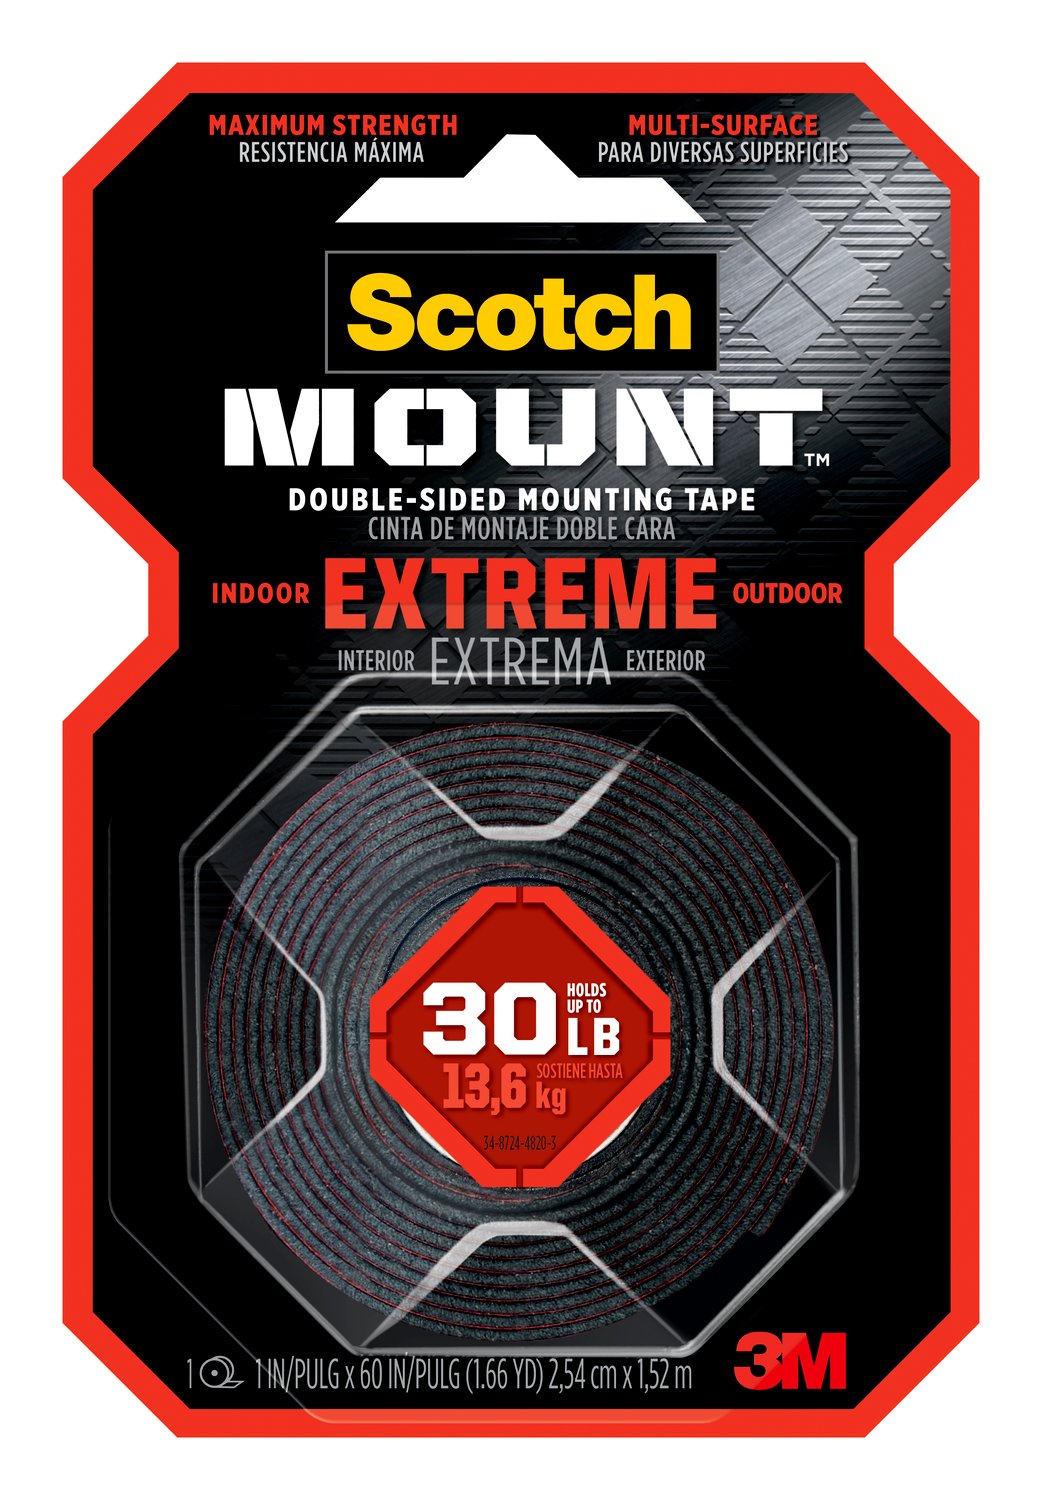 7100205646 - Scotch-Mount Extreme Double-Sided Mounting Tape 414H-DC, 1 In X 60 In
(2,54 Cm X 1,52 M)